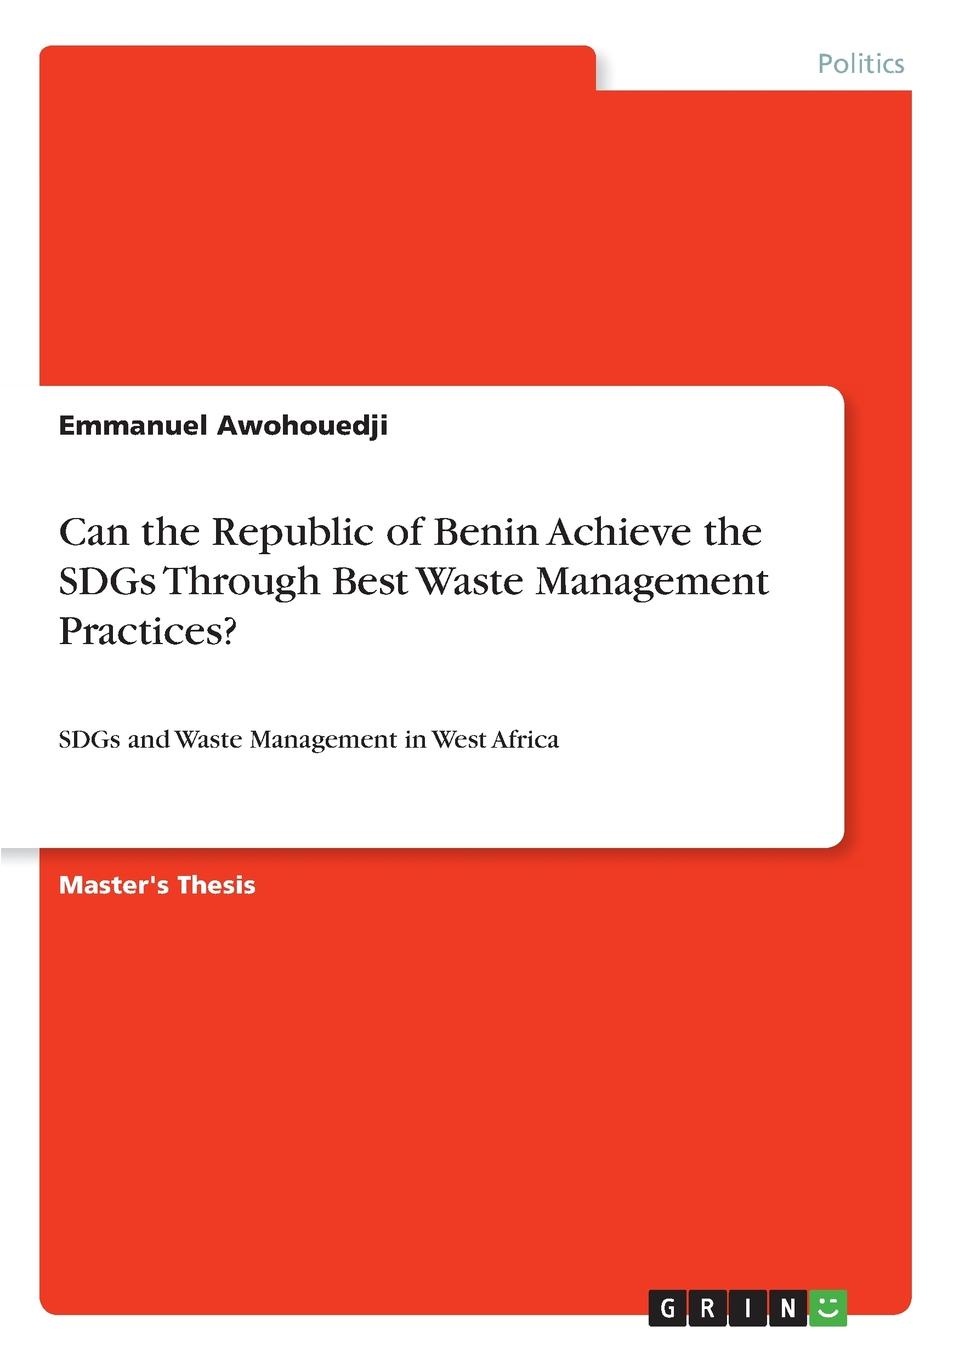 Can the Republic of Benin Achieve the SDGs Through Best Waste Management Practices.